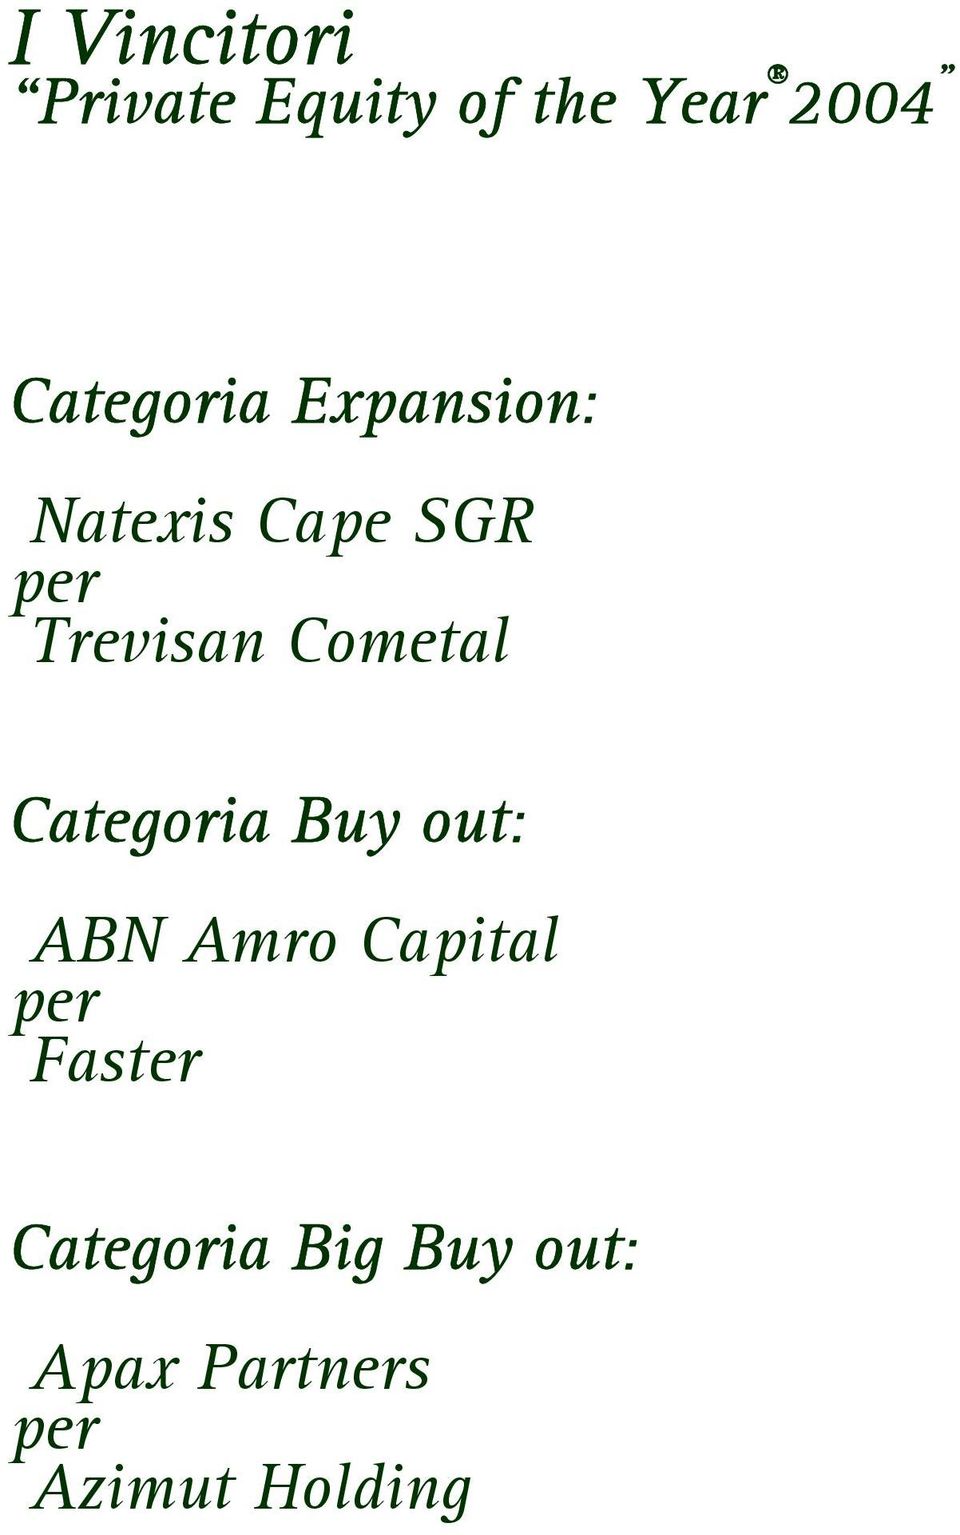 Cometal Categoria Buy out: ABN Amro Capital